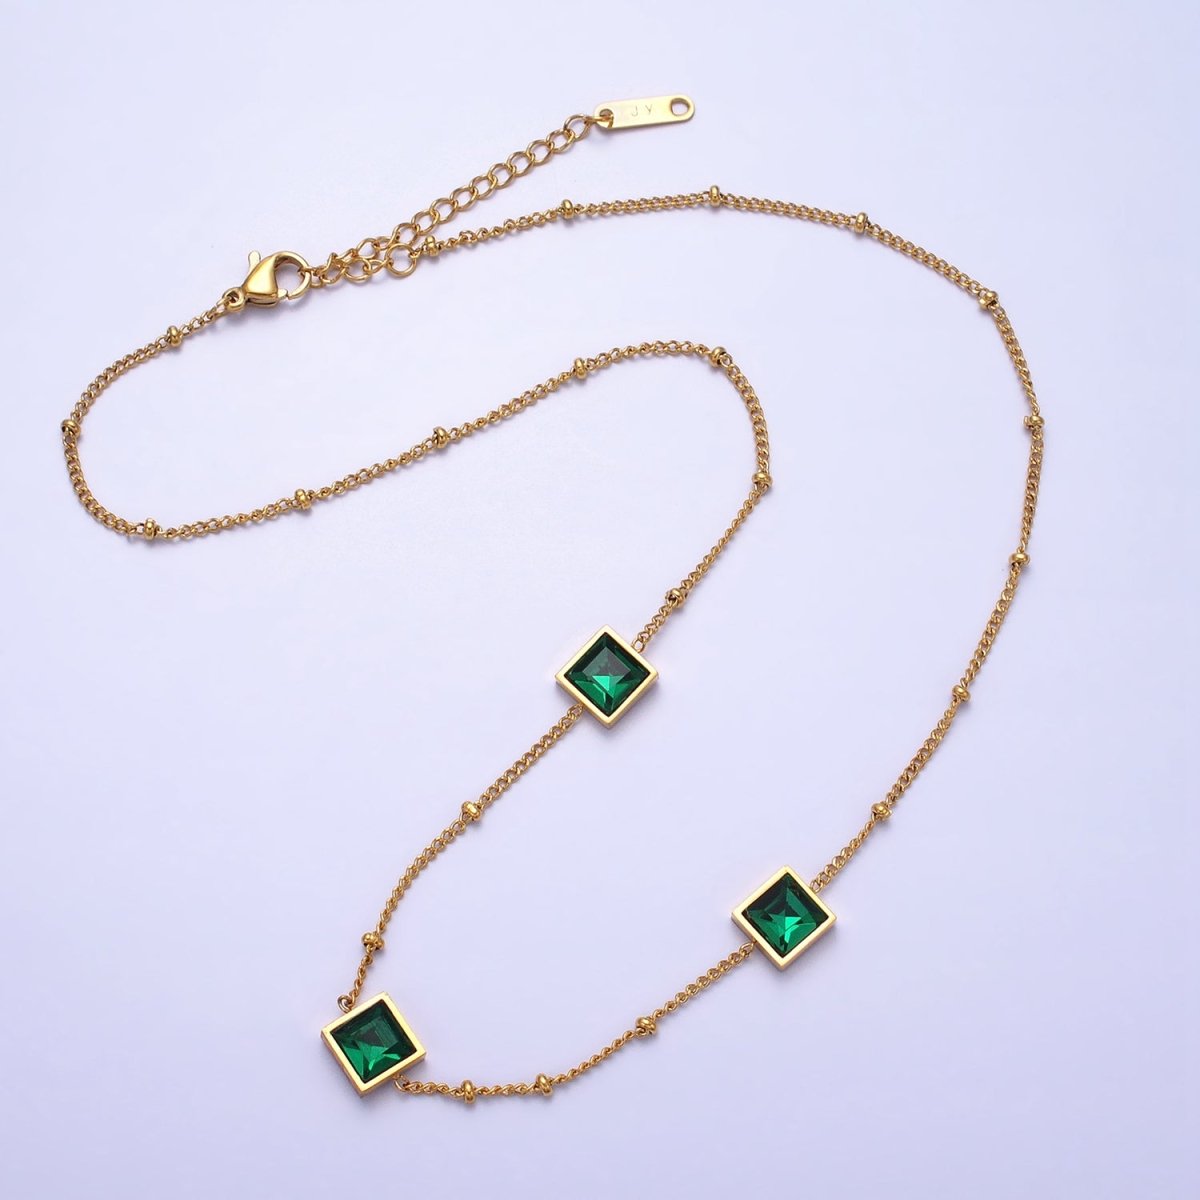 Stainless Steel Triple Green Square CZ Curb Satellite Bead Chain 15 Inch Choker Necklace | WA-1627 Clearance Pricing - DLUXCA